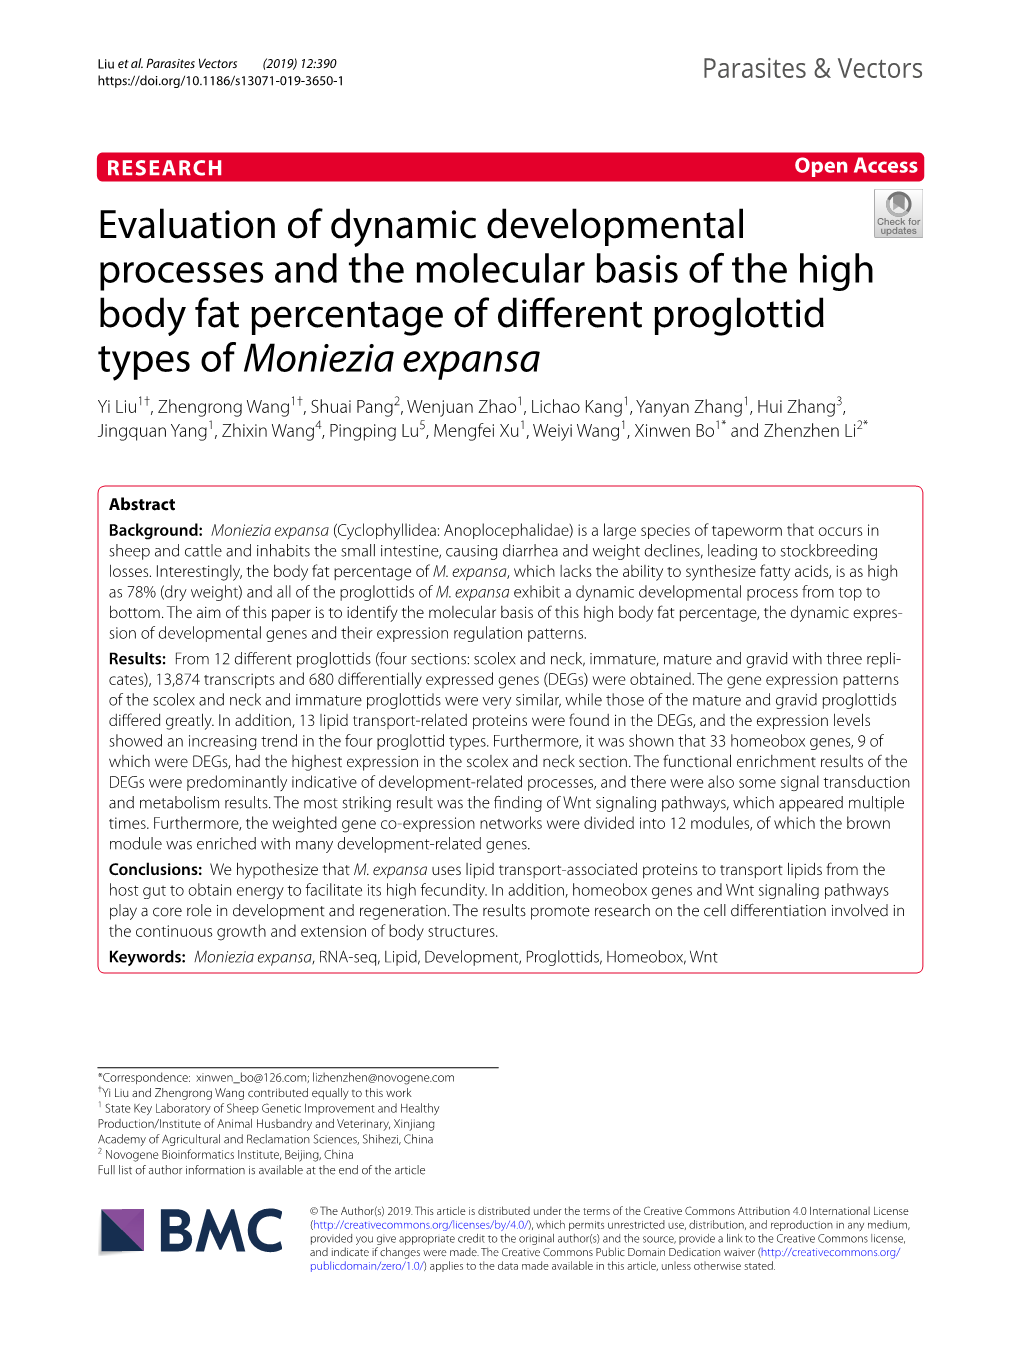 Evaluation of Dynamic Developmental Processes and the Molecular Basis of the High Body Fat Percentage of Different Proglottid Ty